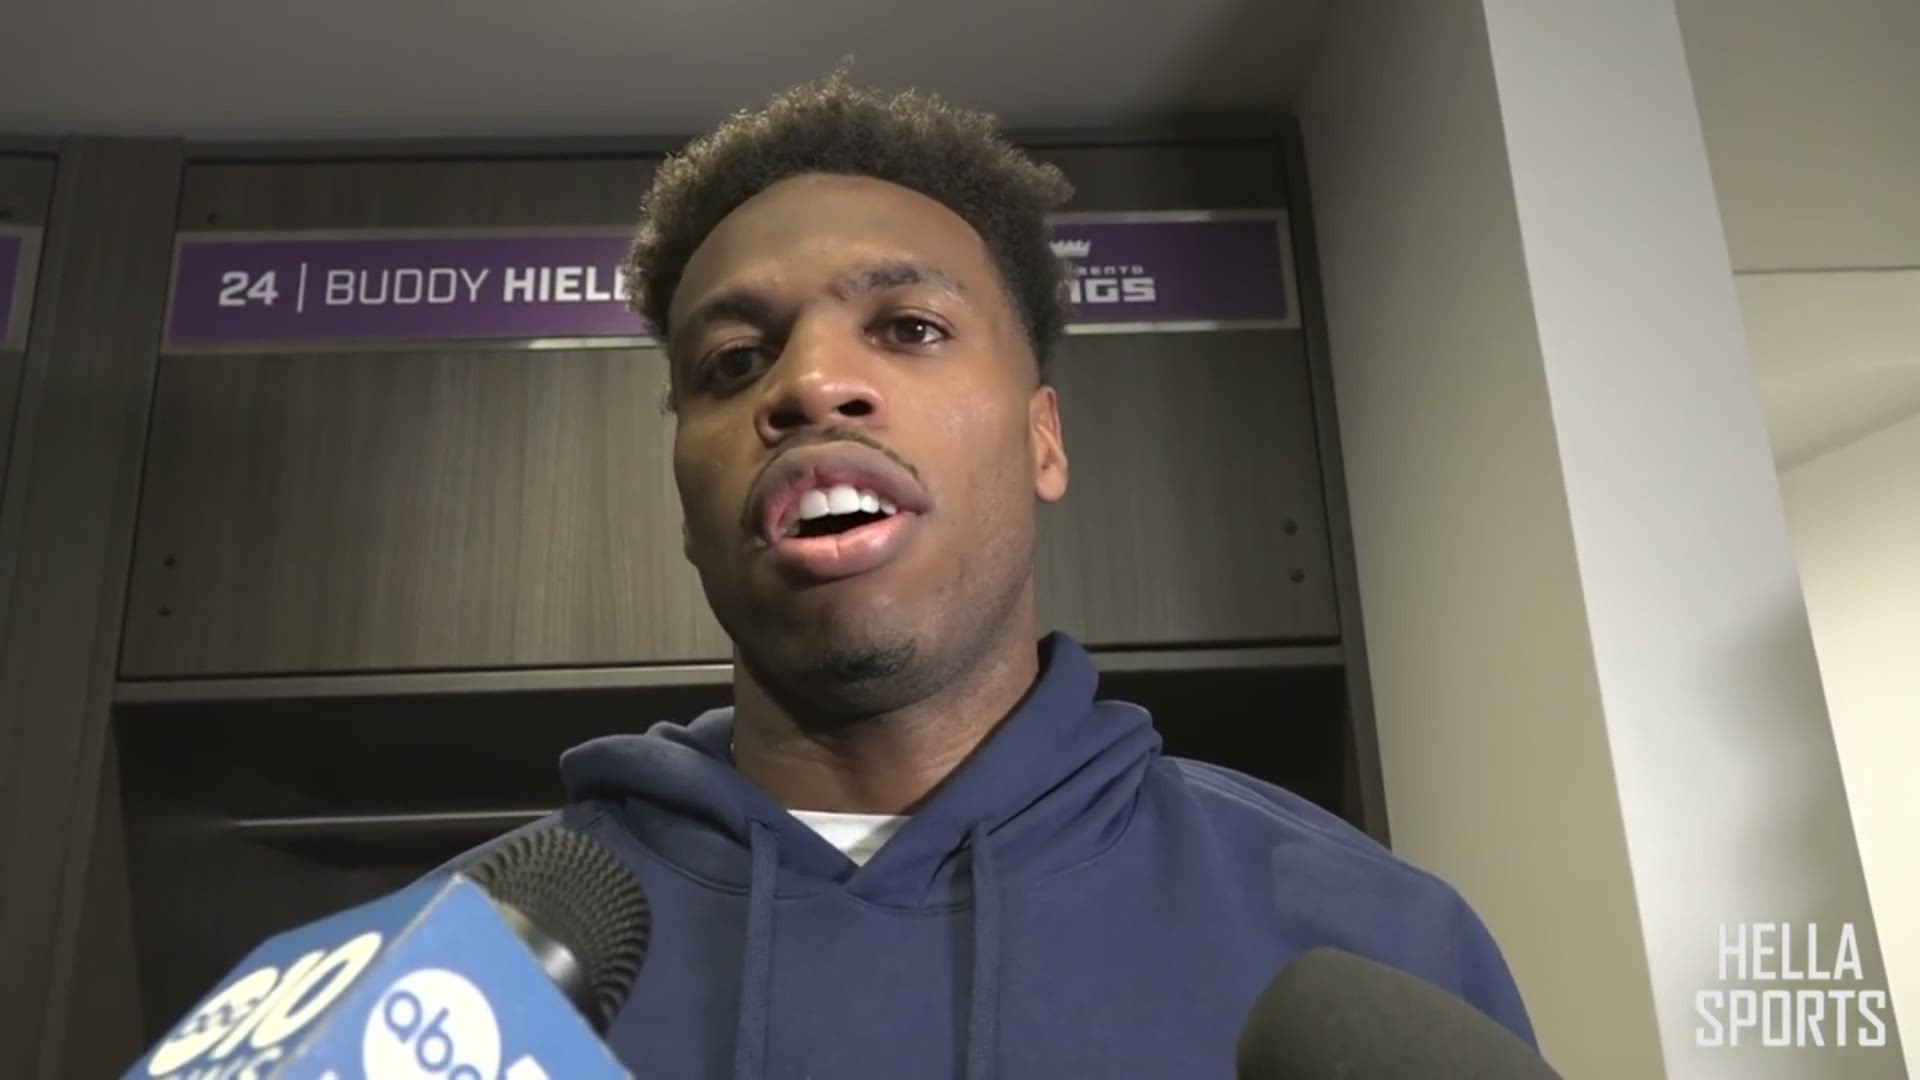 Kings shooting guard Buddy Hield talks about picking up a much needed 111-98 win over the shorthanded Golden State Warriors.